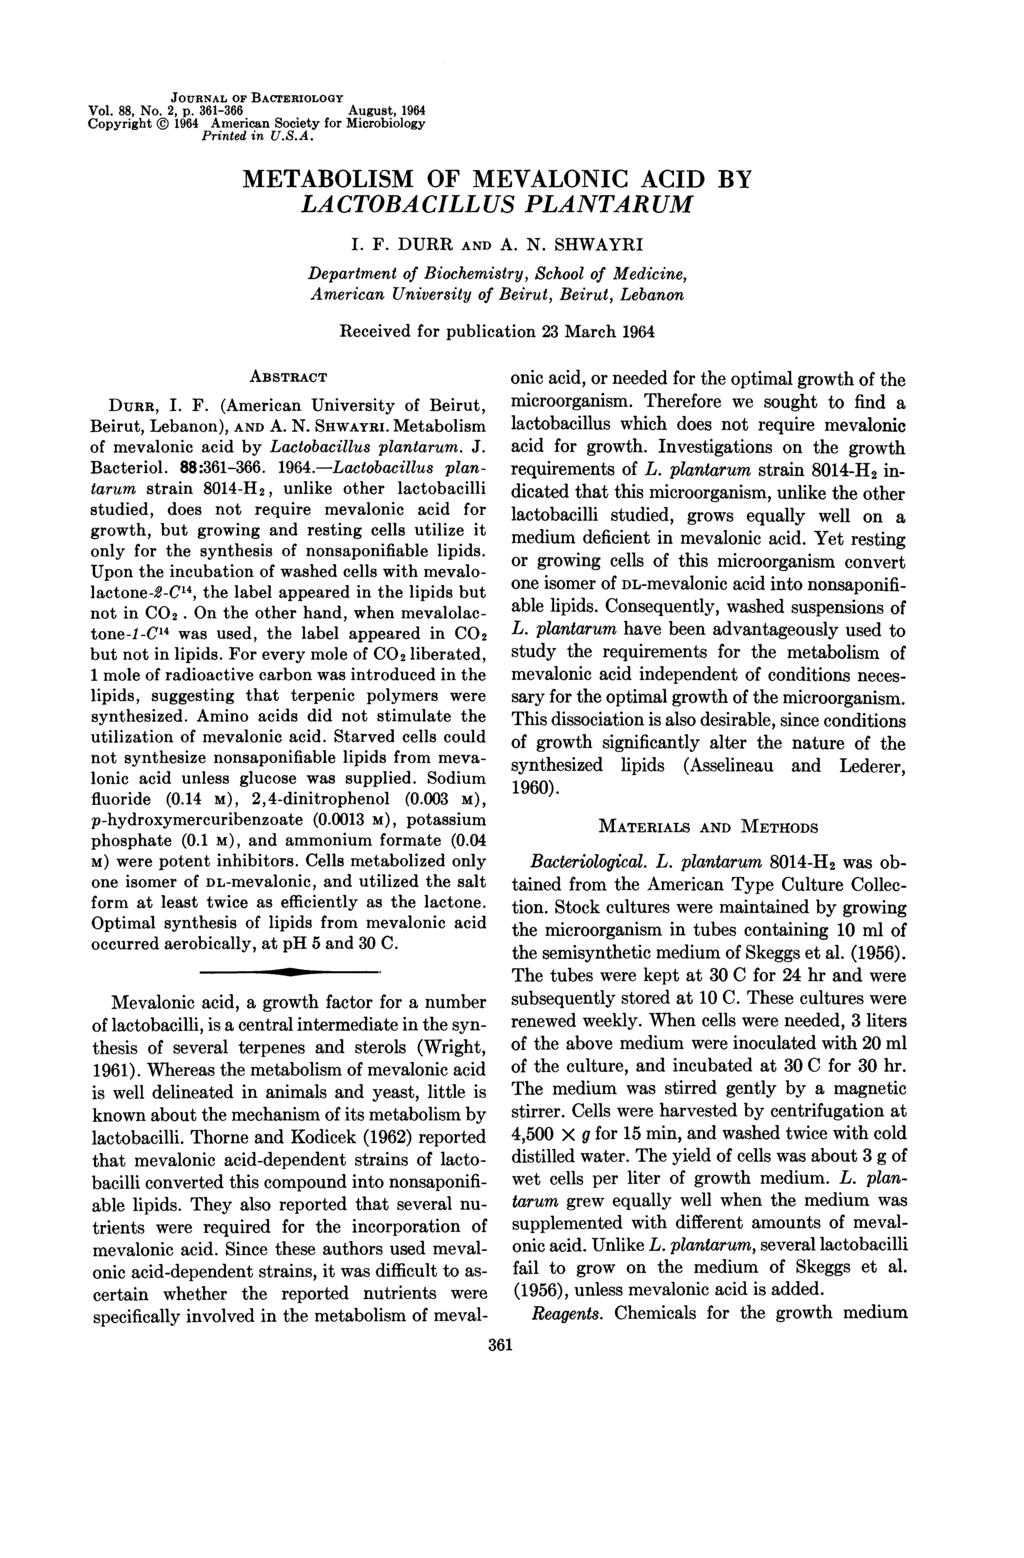 JOURNAL OF BACTERIOLOGY Vol. 88, No. 2, p. 361-366 August, 1964 Copyright 1964 American Society for Microbiology Printed in U.S.A. METABOLISM OF MEVALONIC ACID BY LA CTOBA CILL US PLANTAR UM I. F.